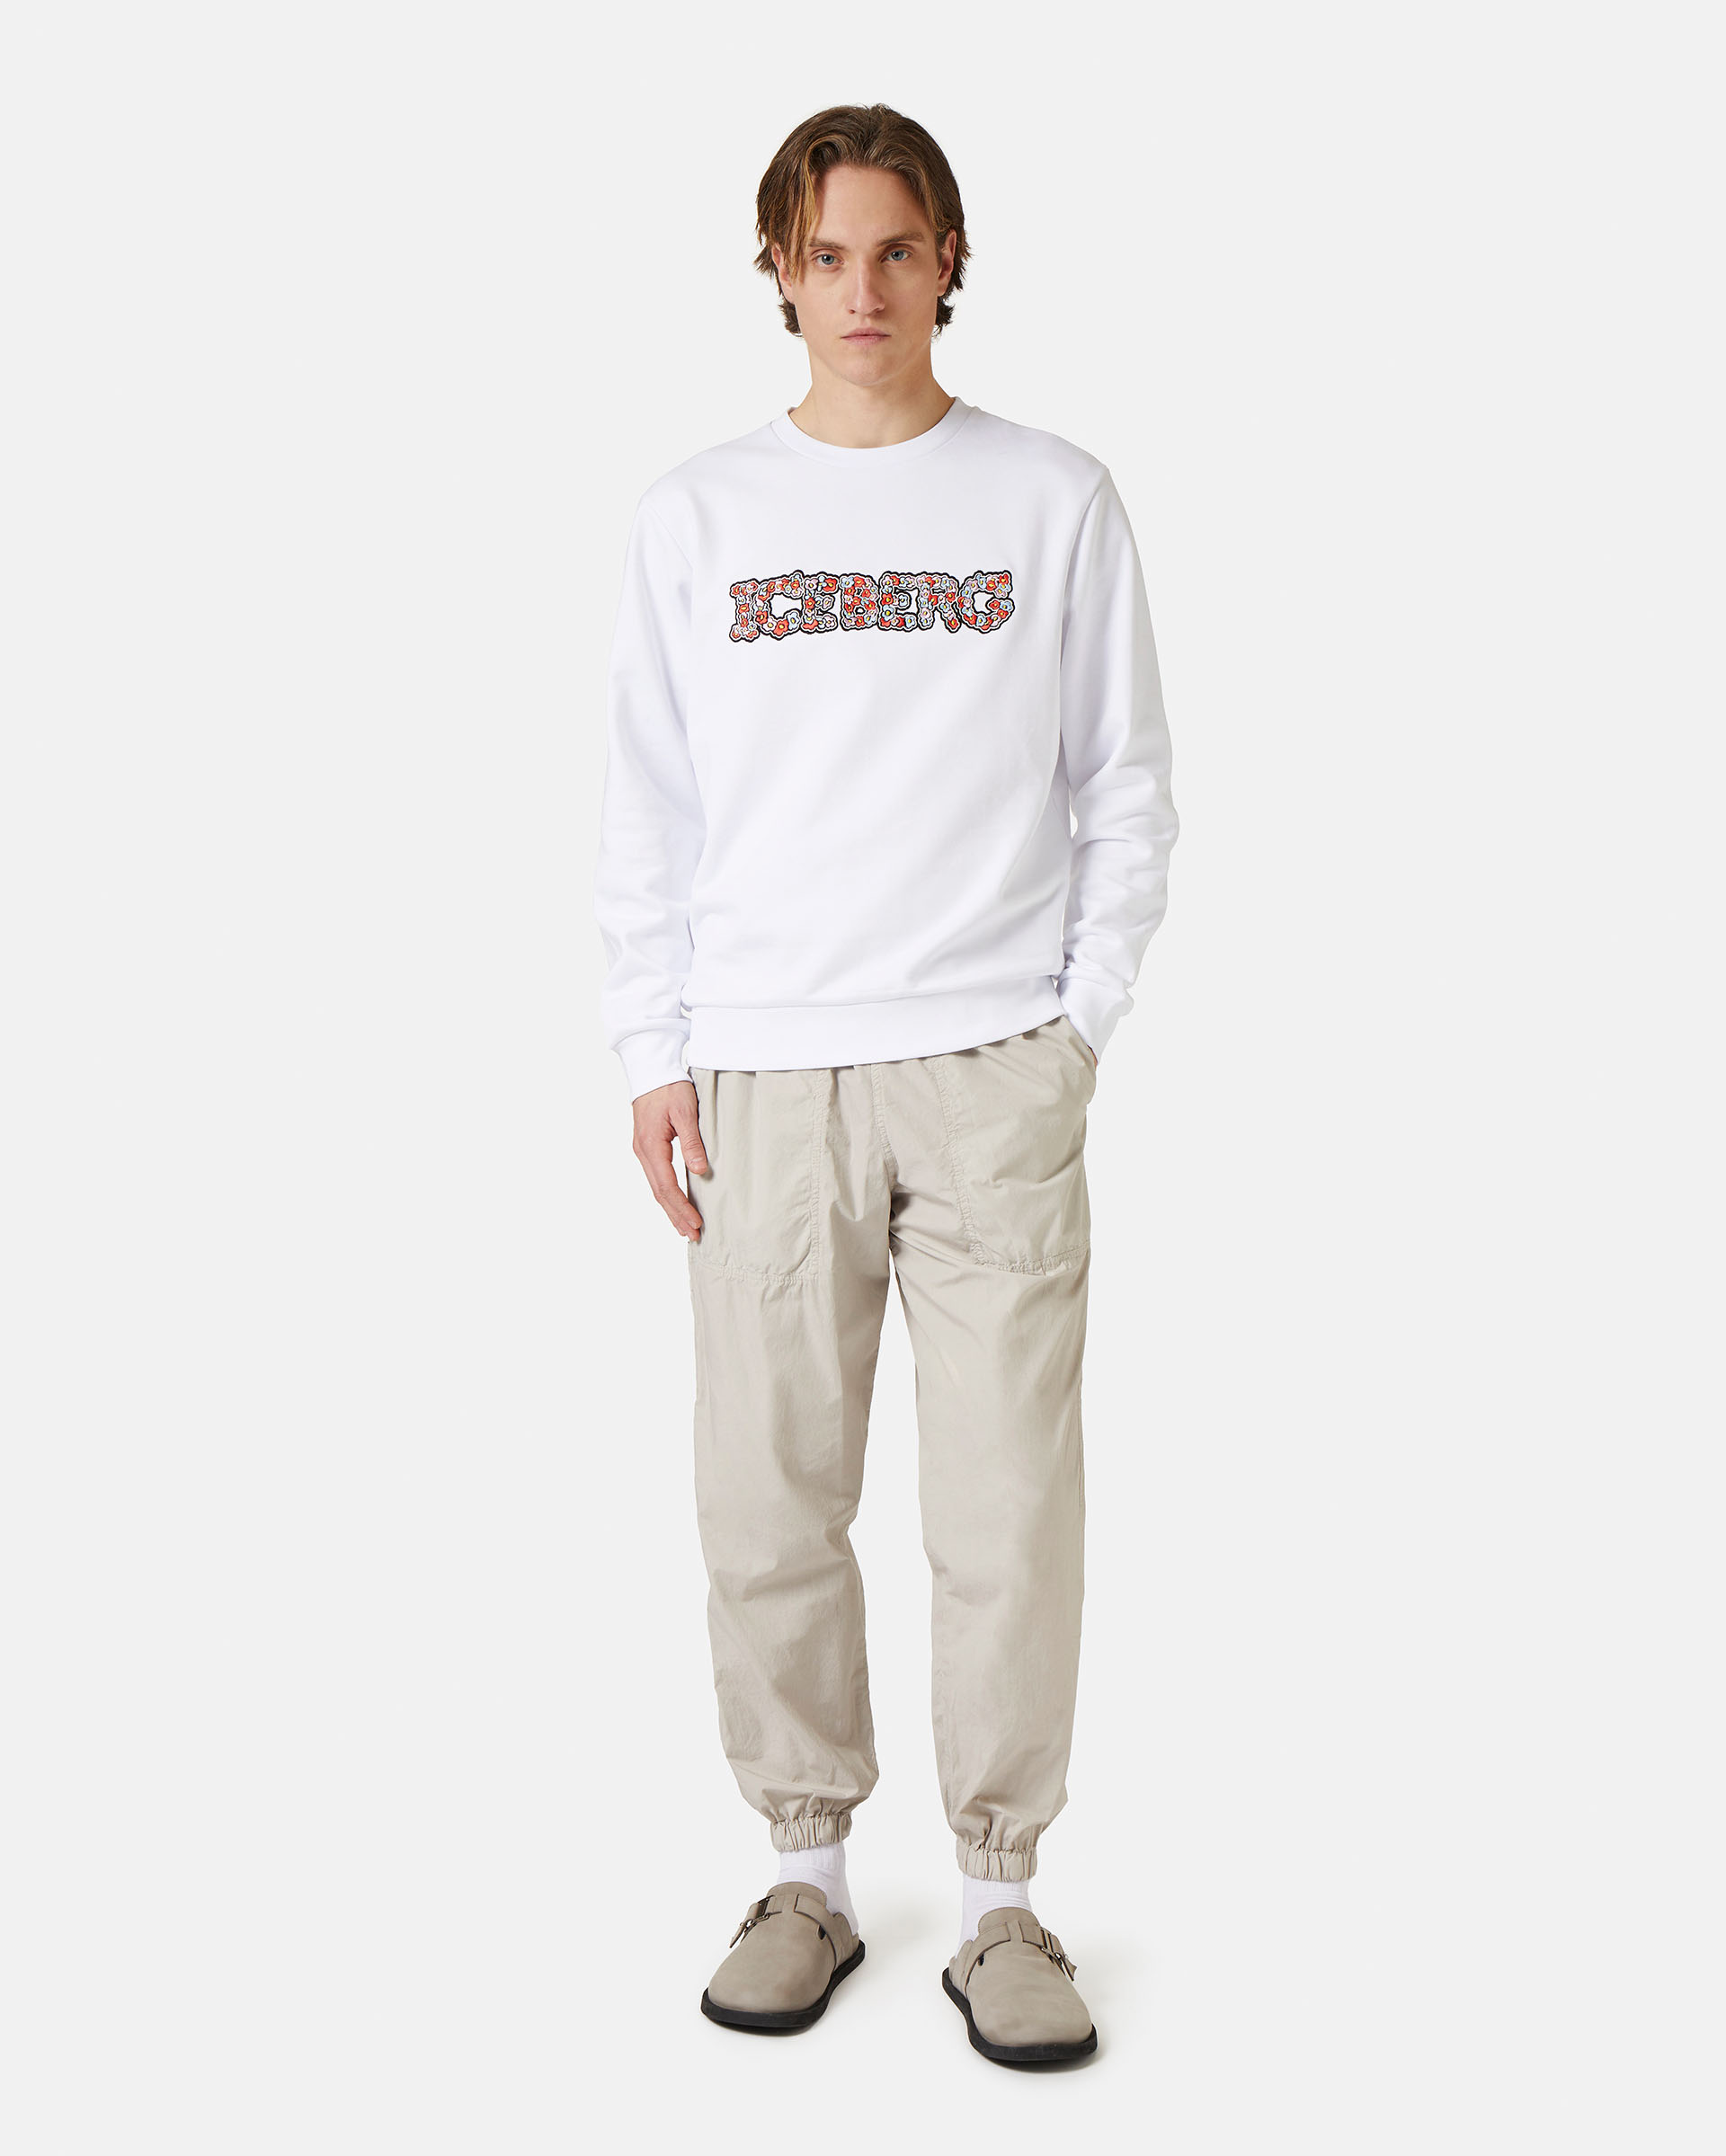 Sweatshirt with floral logo - Iceberg - Official Website